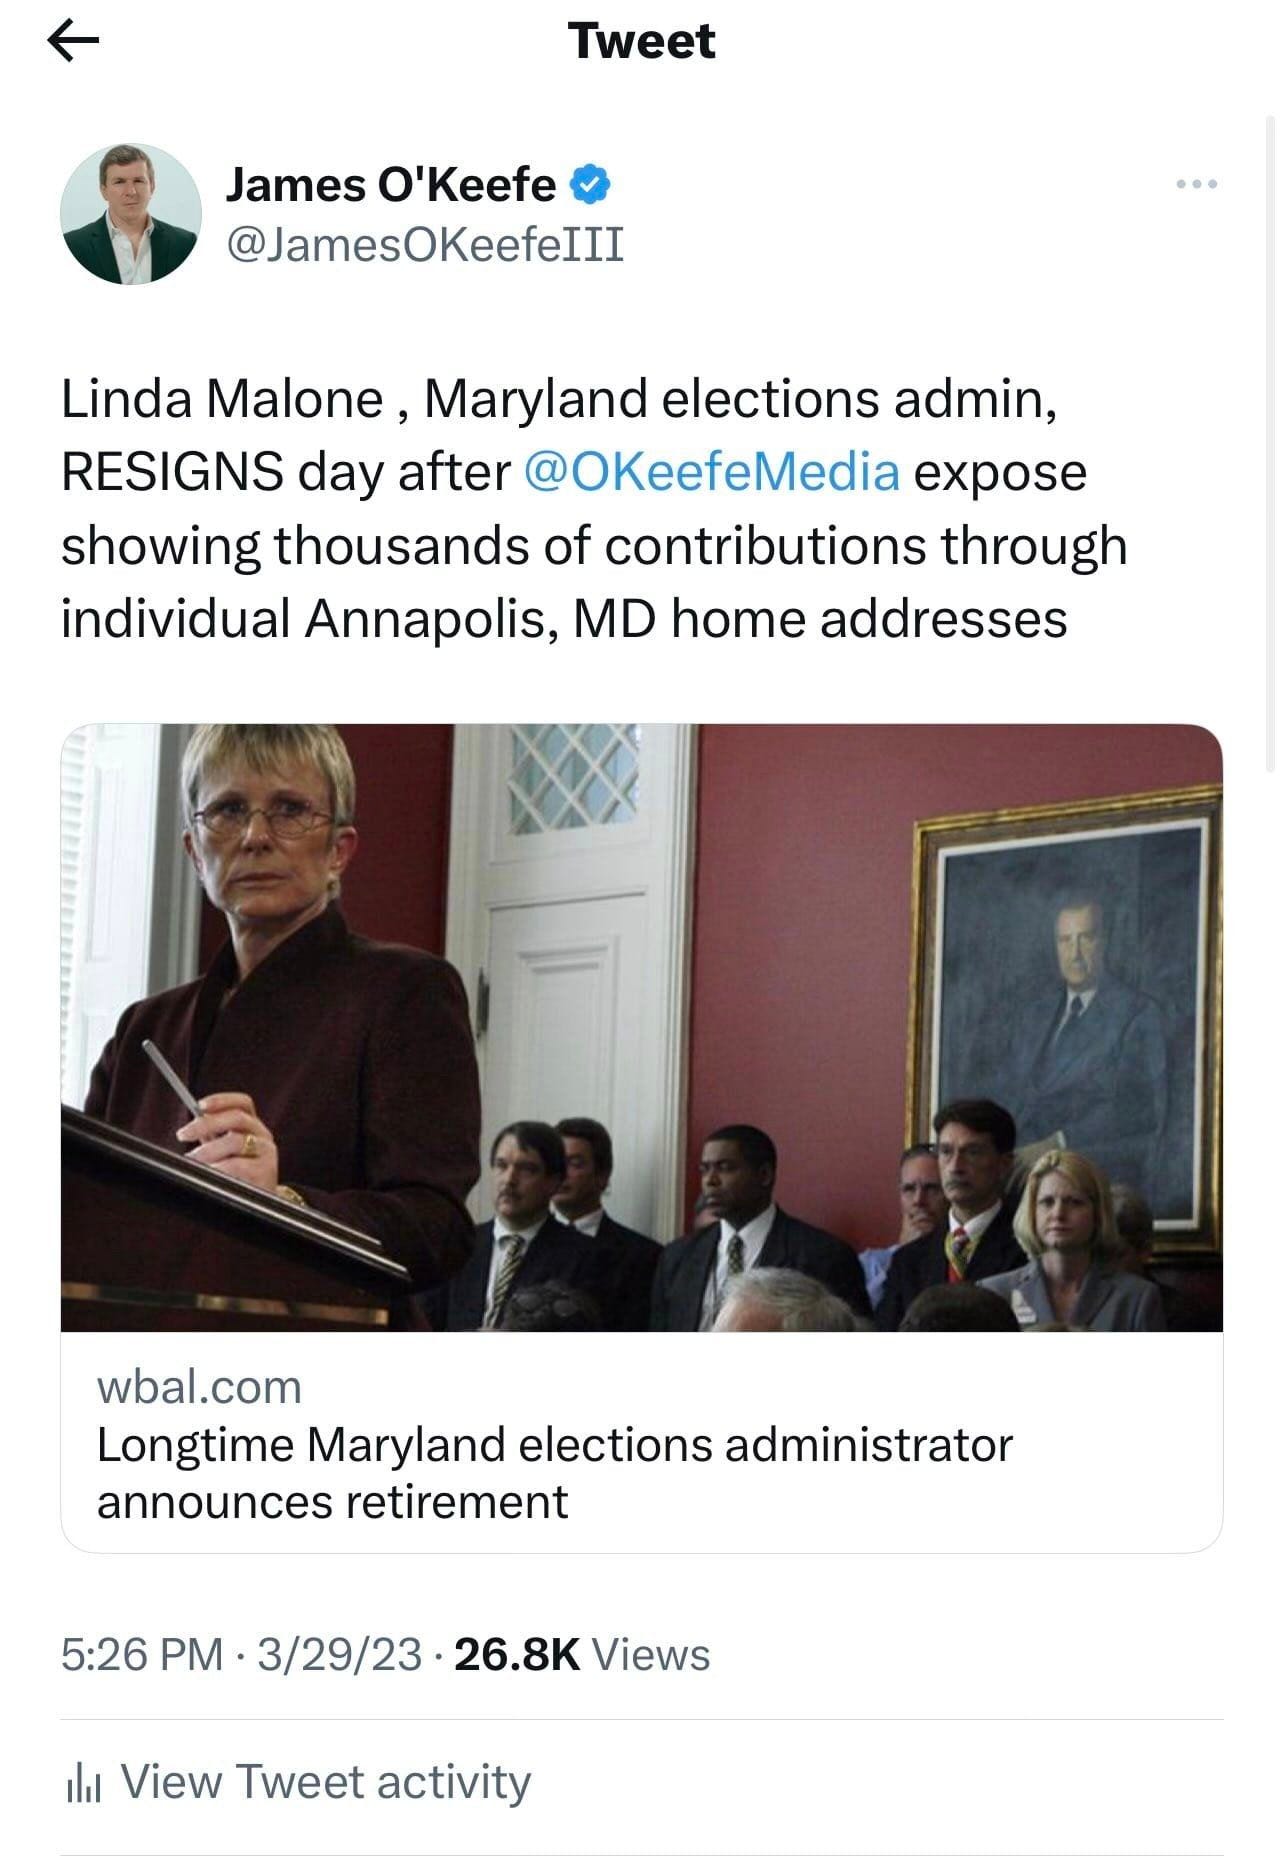 May be an image of 7 people and text that says 'Tweet James O'Keefe @JamesOKeefeIII Linda Malone, Maryland elections admin, RESIGNS day after @OKeefeMedia expose showing thousands of contributions through individual Annapolis, MD home addresses wbal.com Longtime Maryland elections administrator announces retirement 5:26 PM 3/29/23 26.8K Views 山 View Tweet activity'